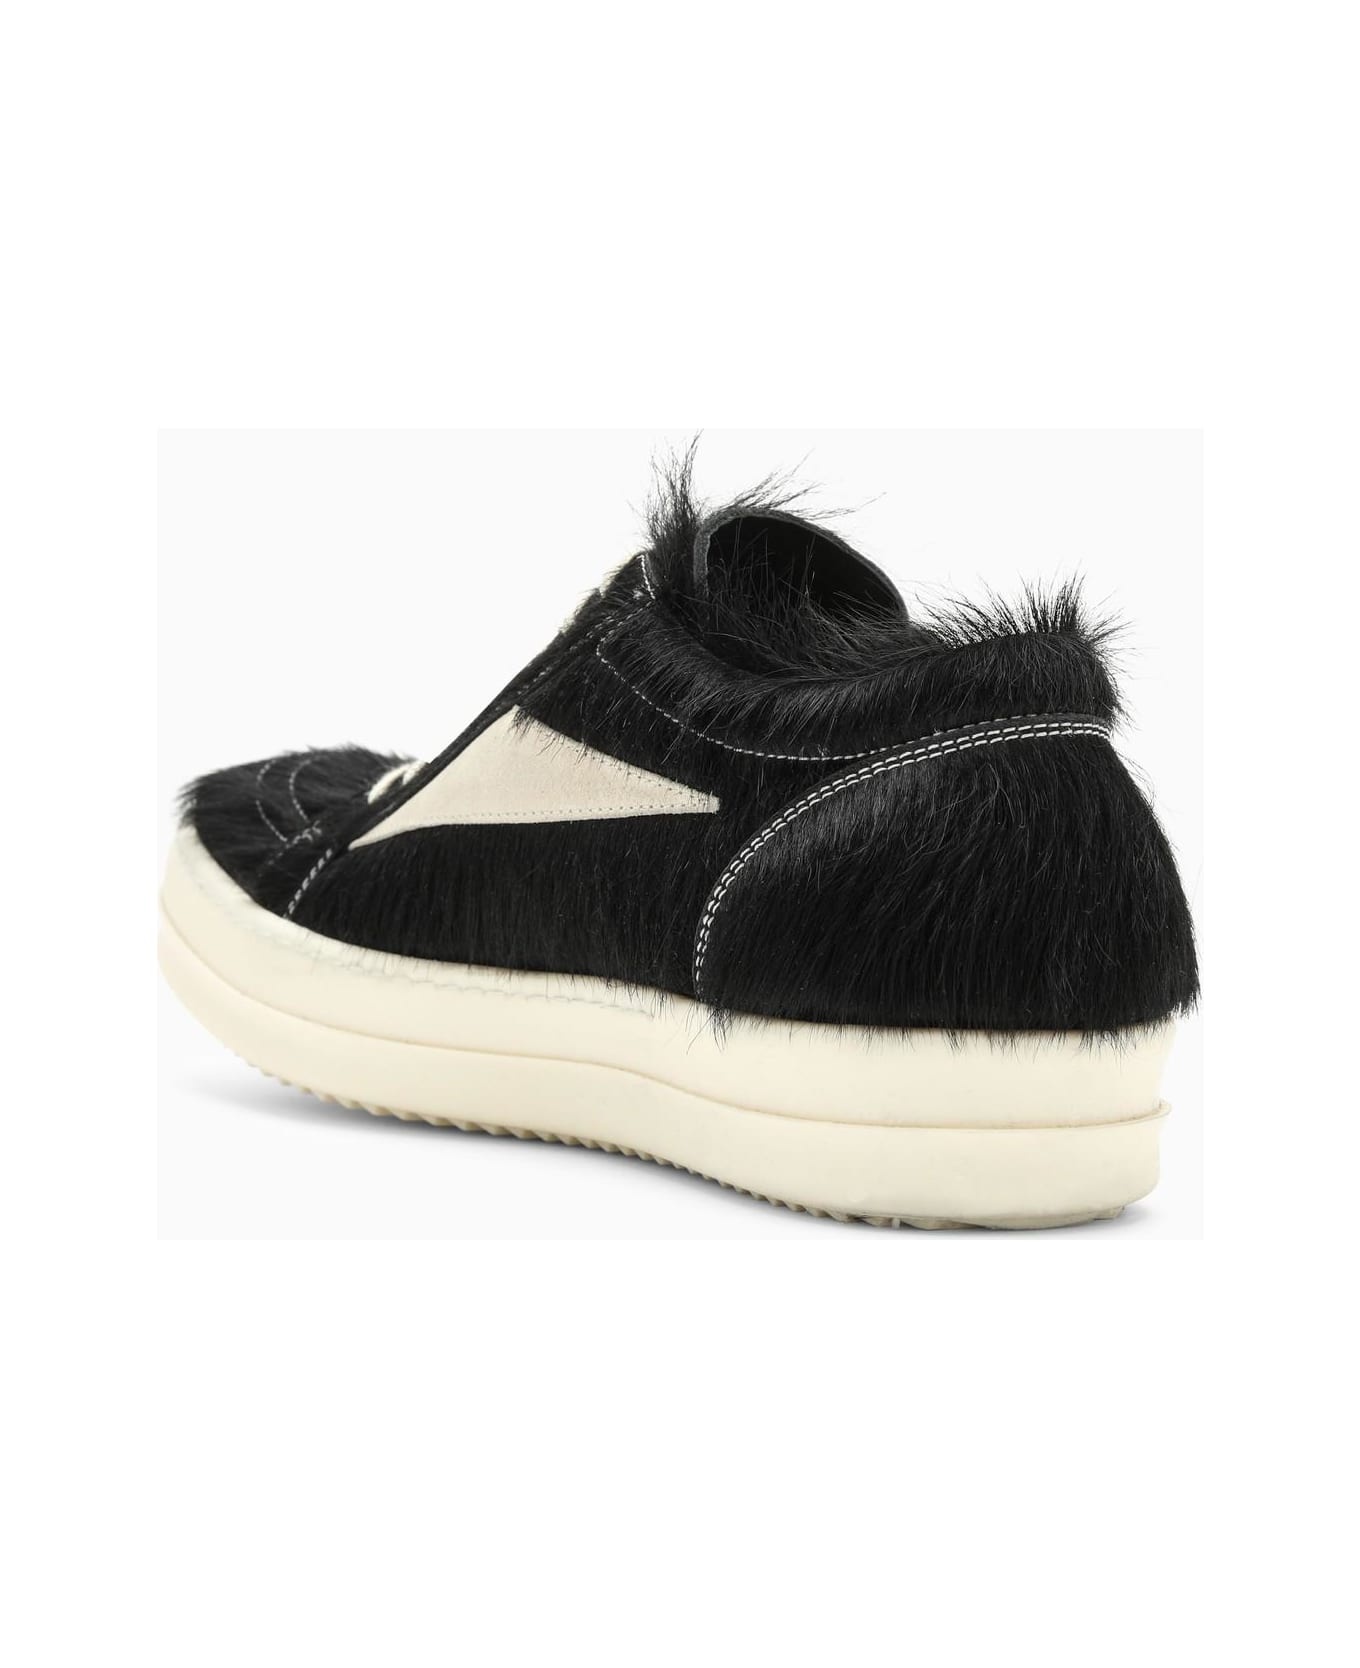 Black/white Sneaker In Leather With Fur - 4